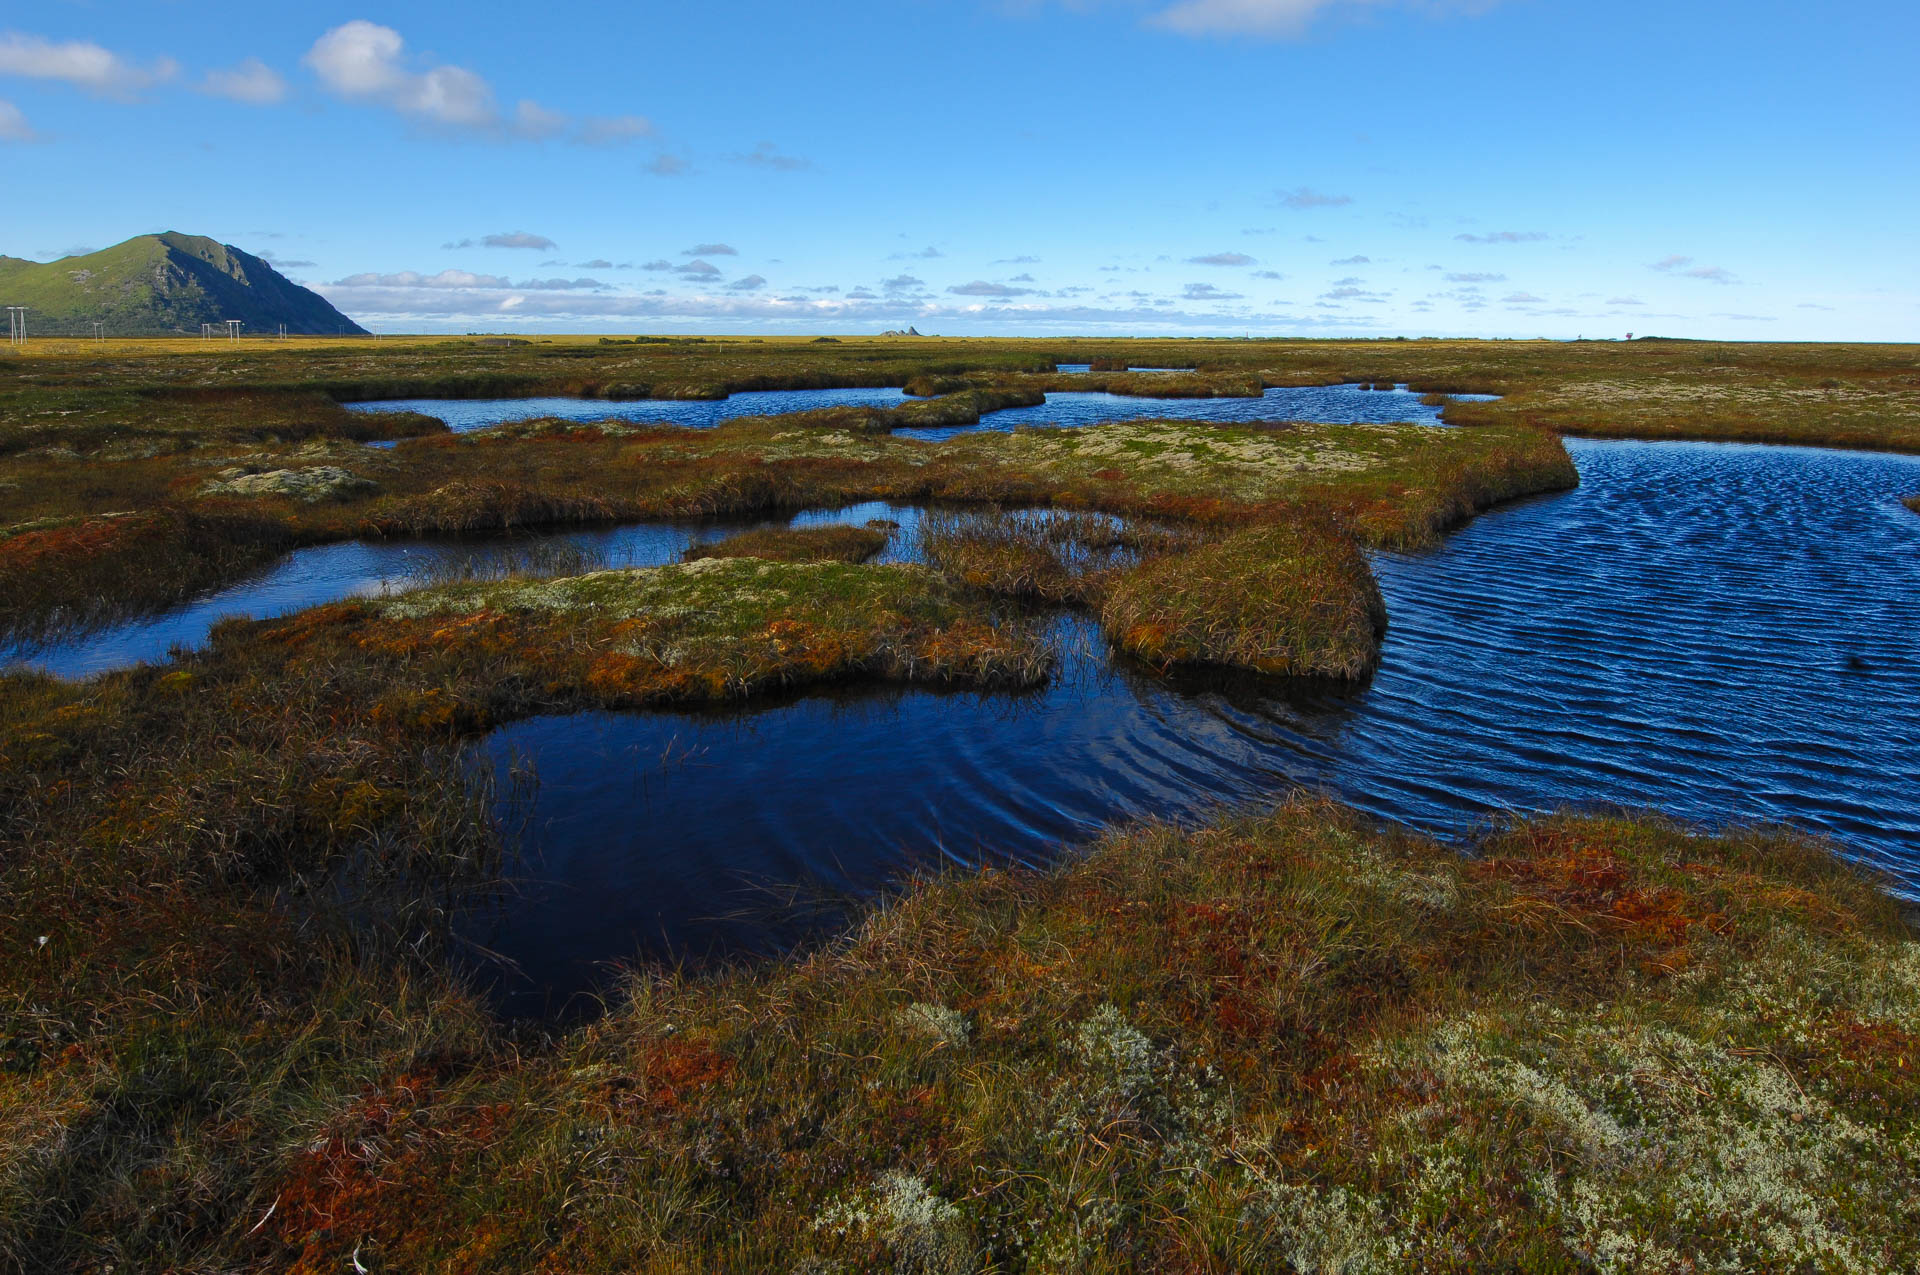 Slight winds over the swamps of Andøya